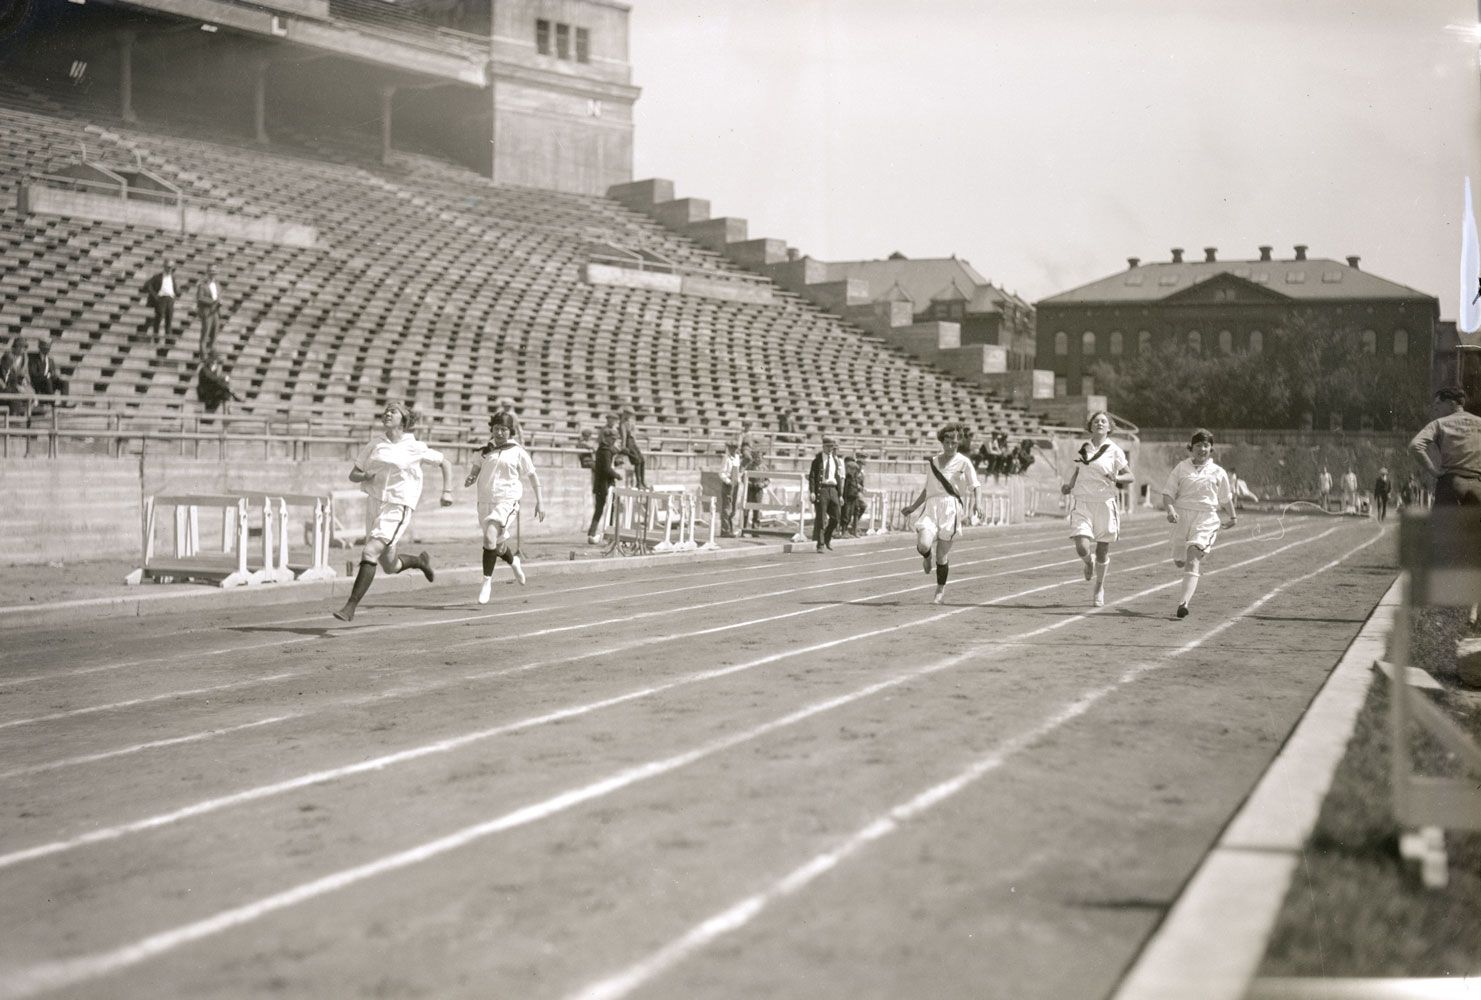 A black and white image of women running on a track